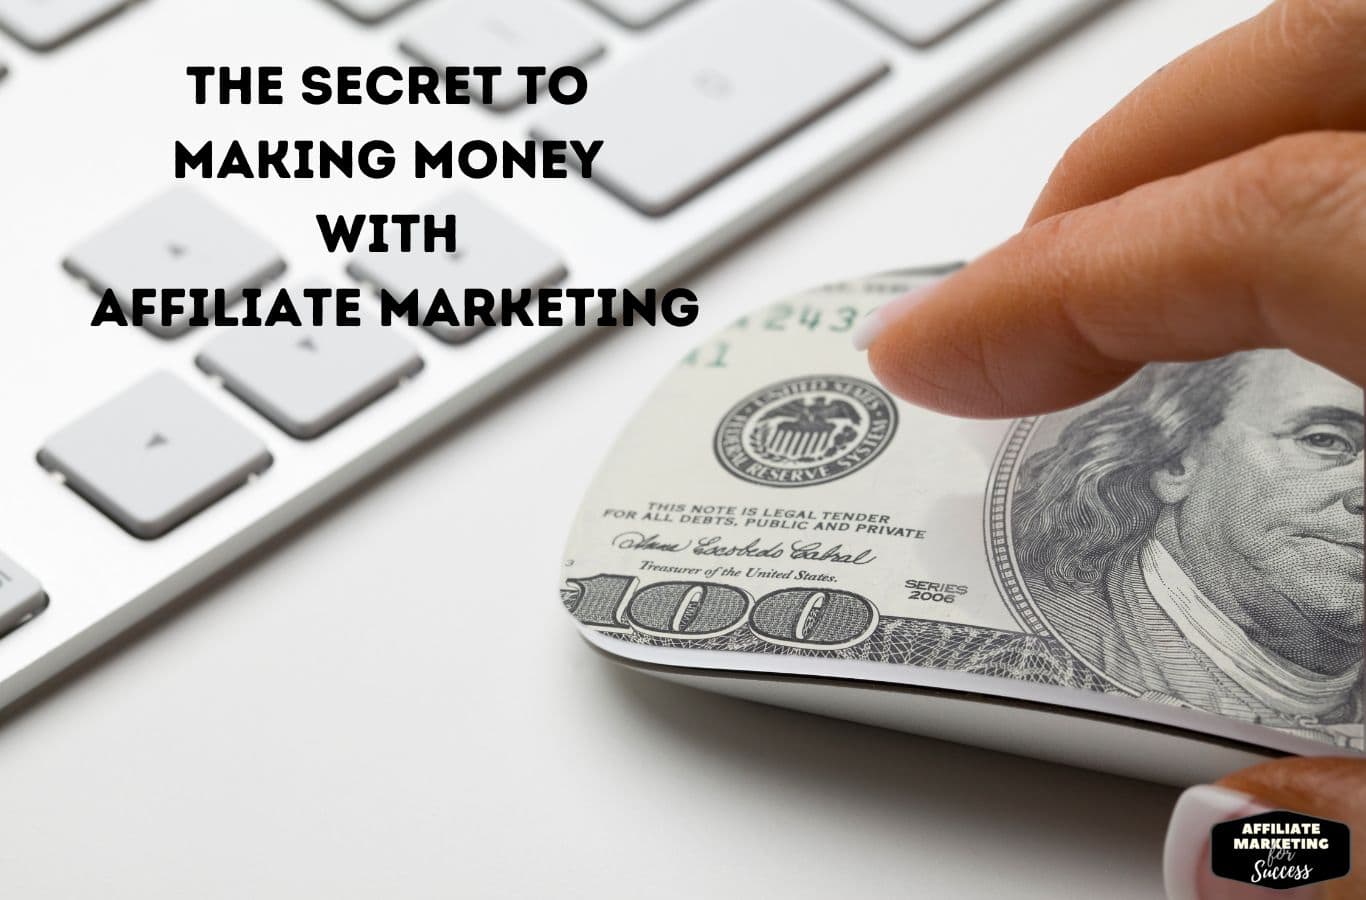 The Secret to Making Money with Affiliate Marketing